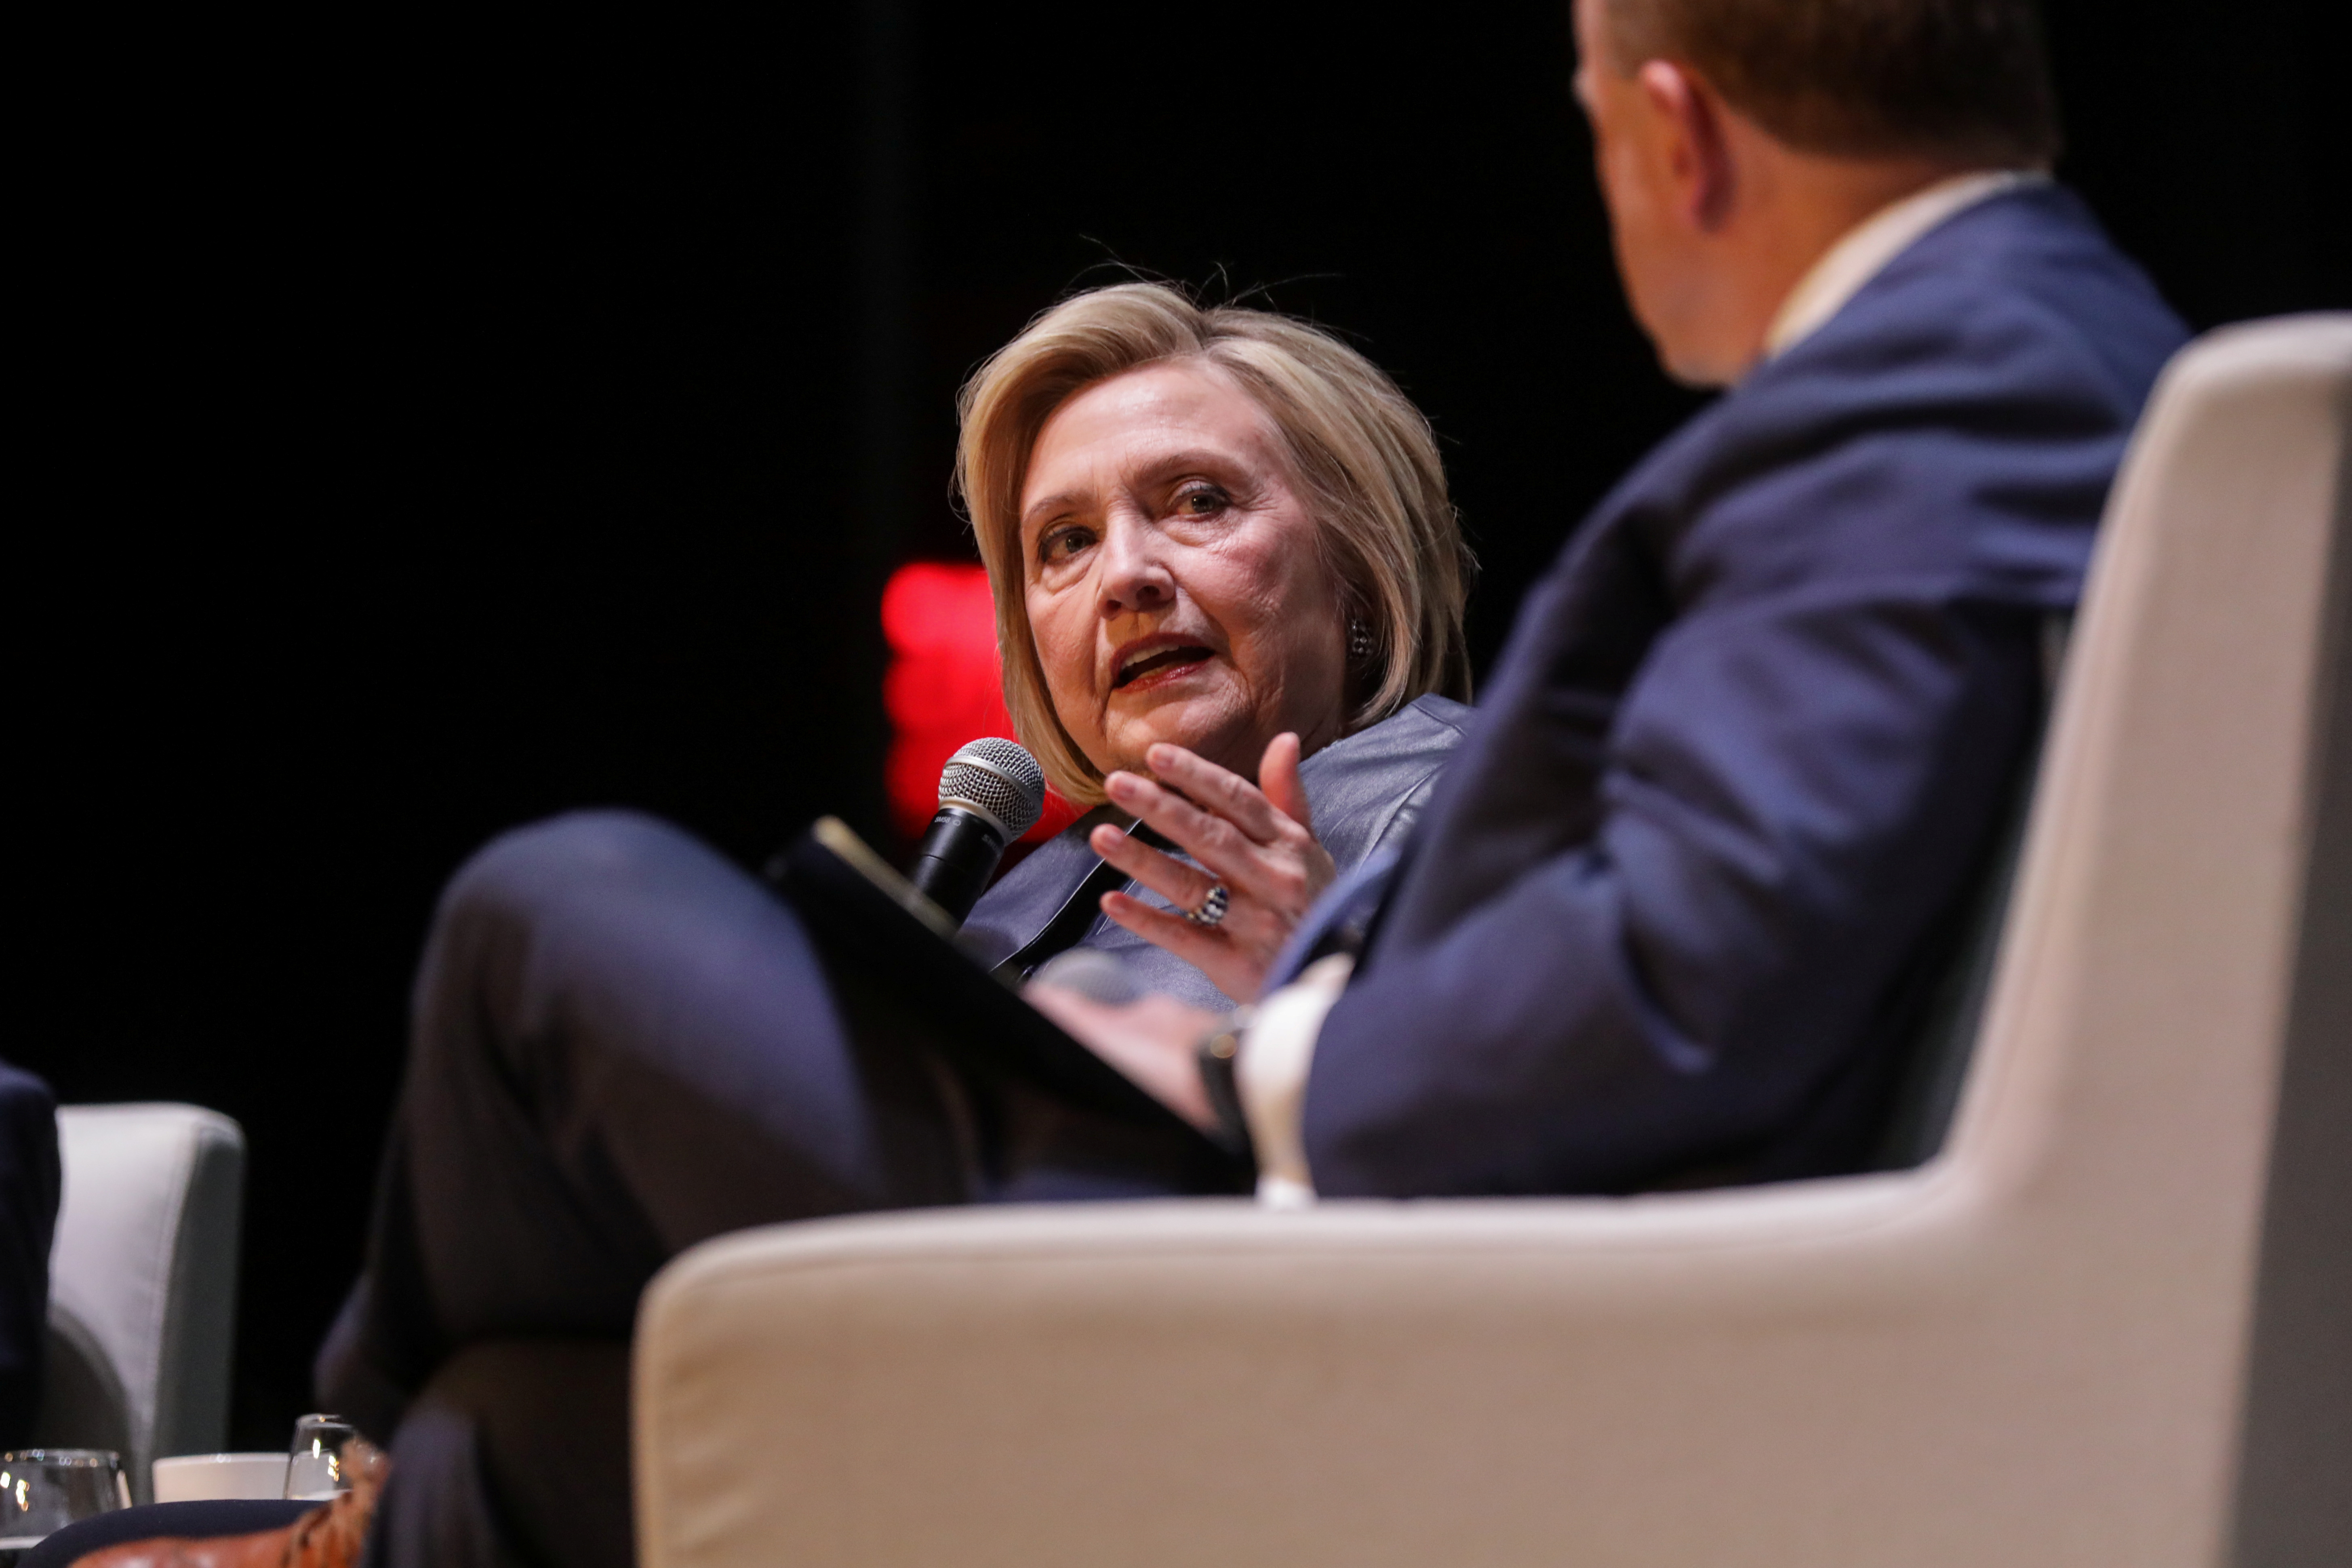 Former Secretary of State Hillary Clinton appears with former President Bill Clinton during a joint on stage conversation event at the Beacon Theatre in New York, U.S., April 11, 2019. REUTERS/Stephen Yang